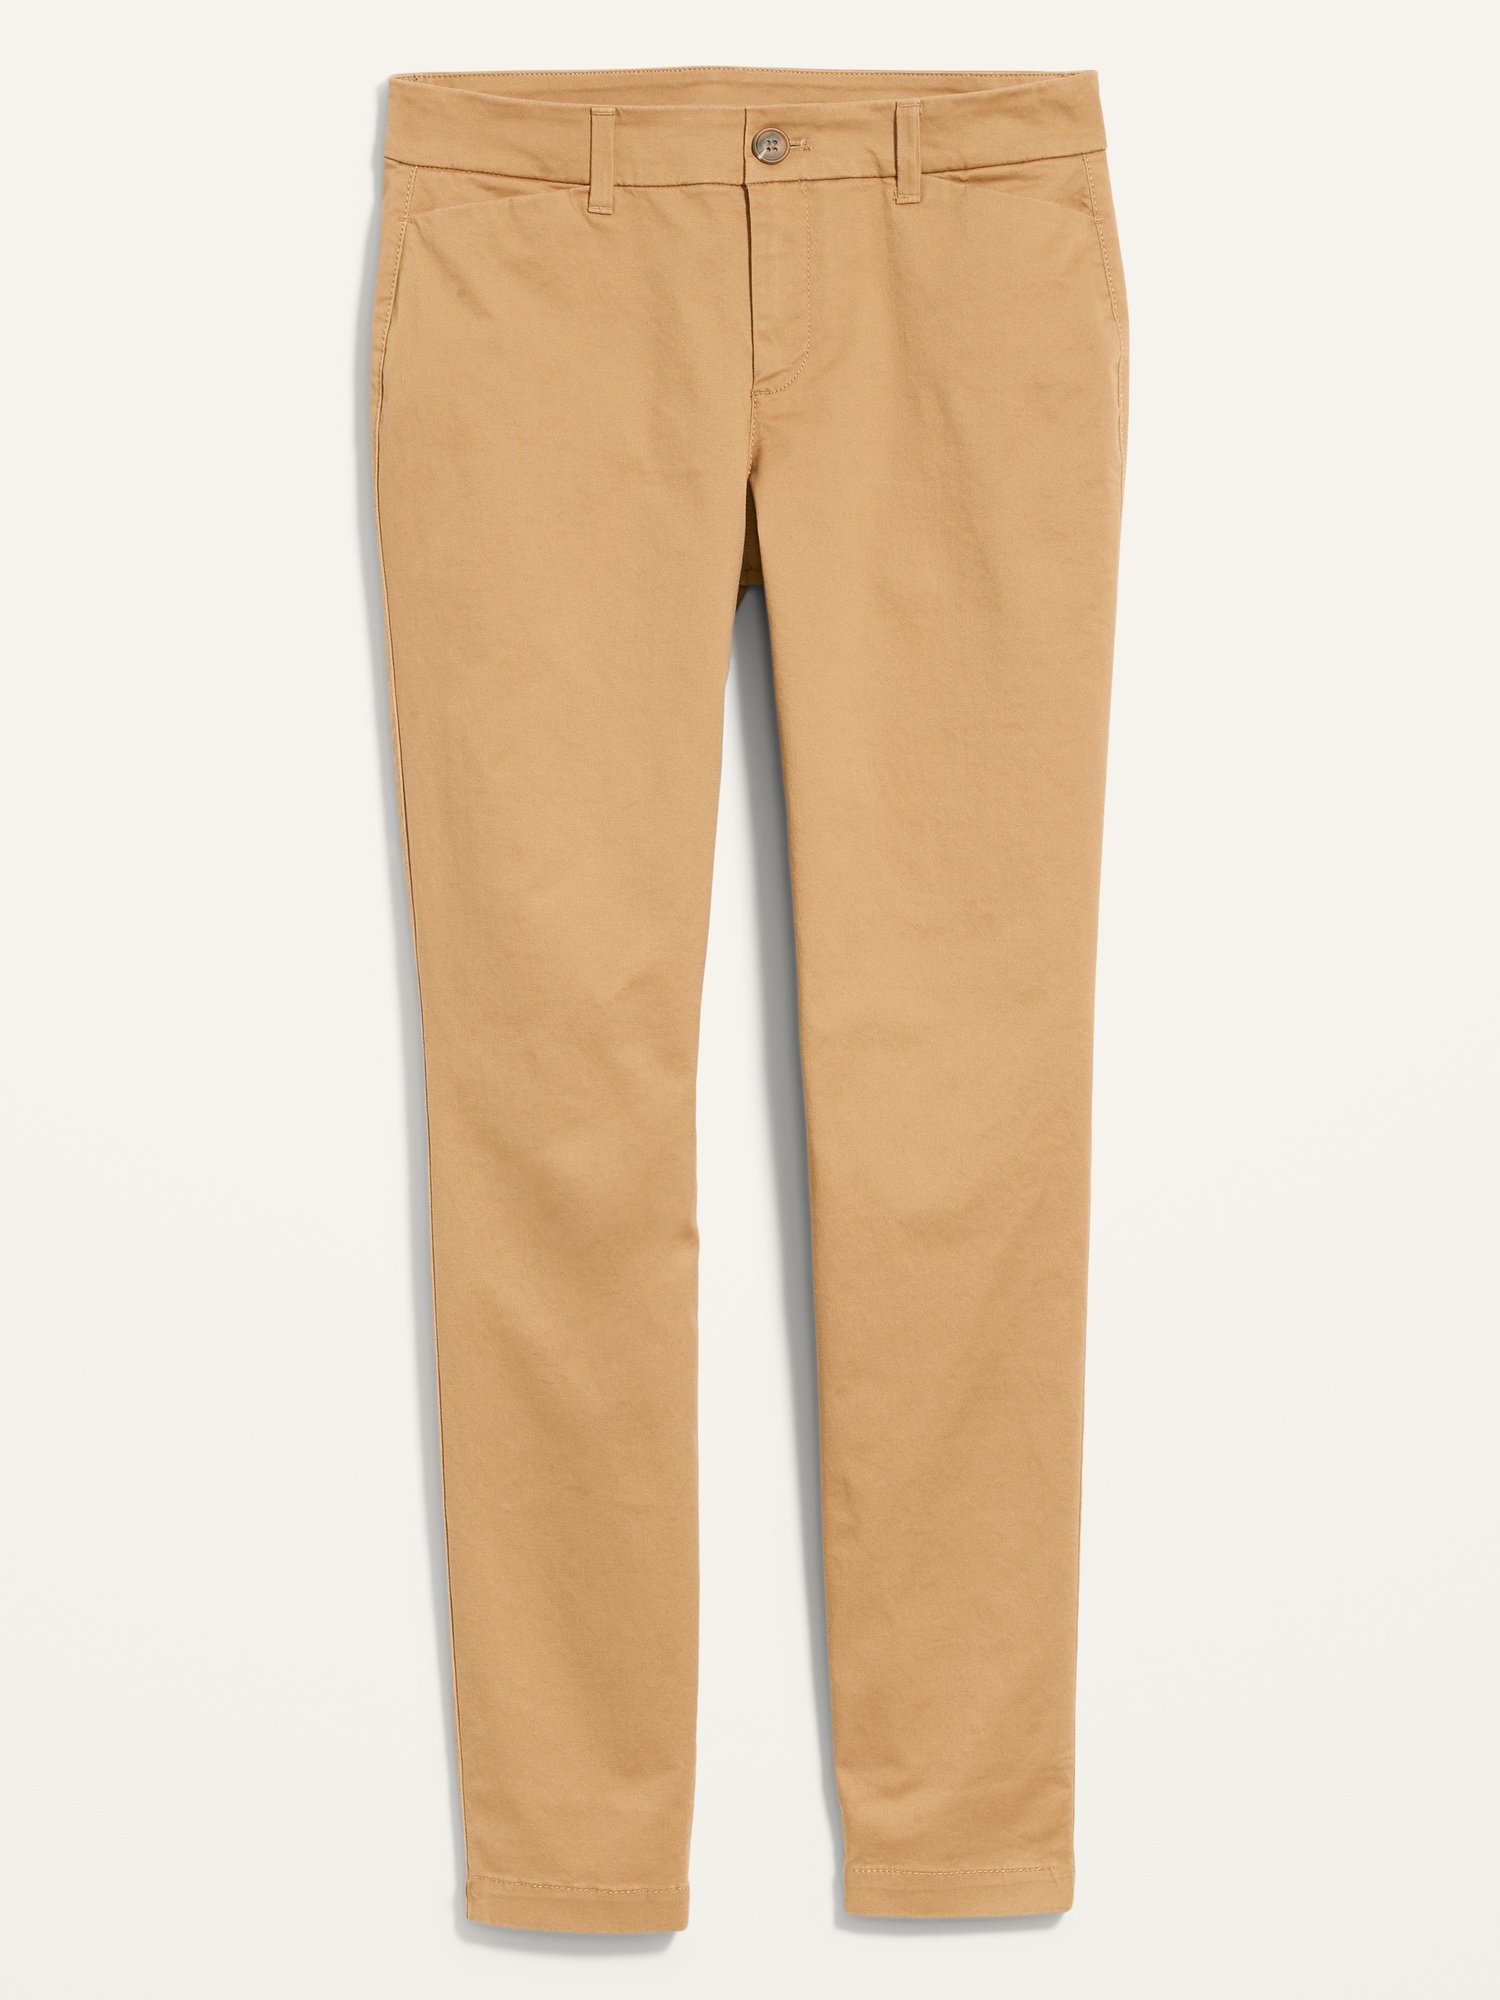 Mid-Rise Skinny Everyday Khakis for Women | Old Navy